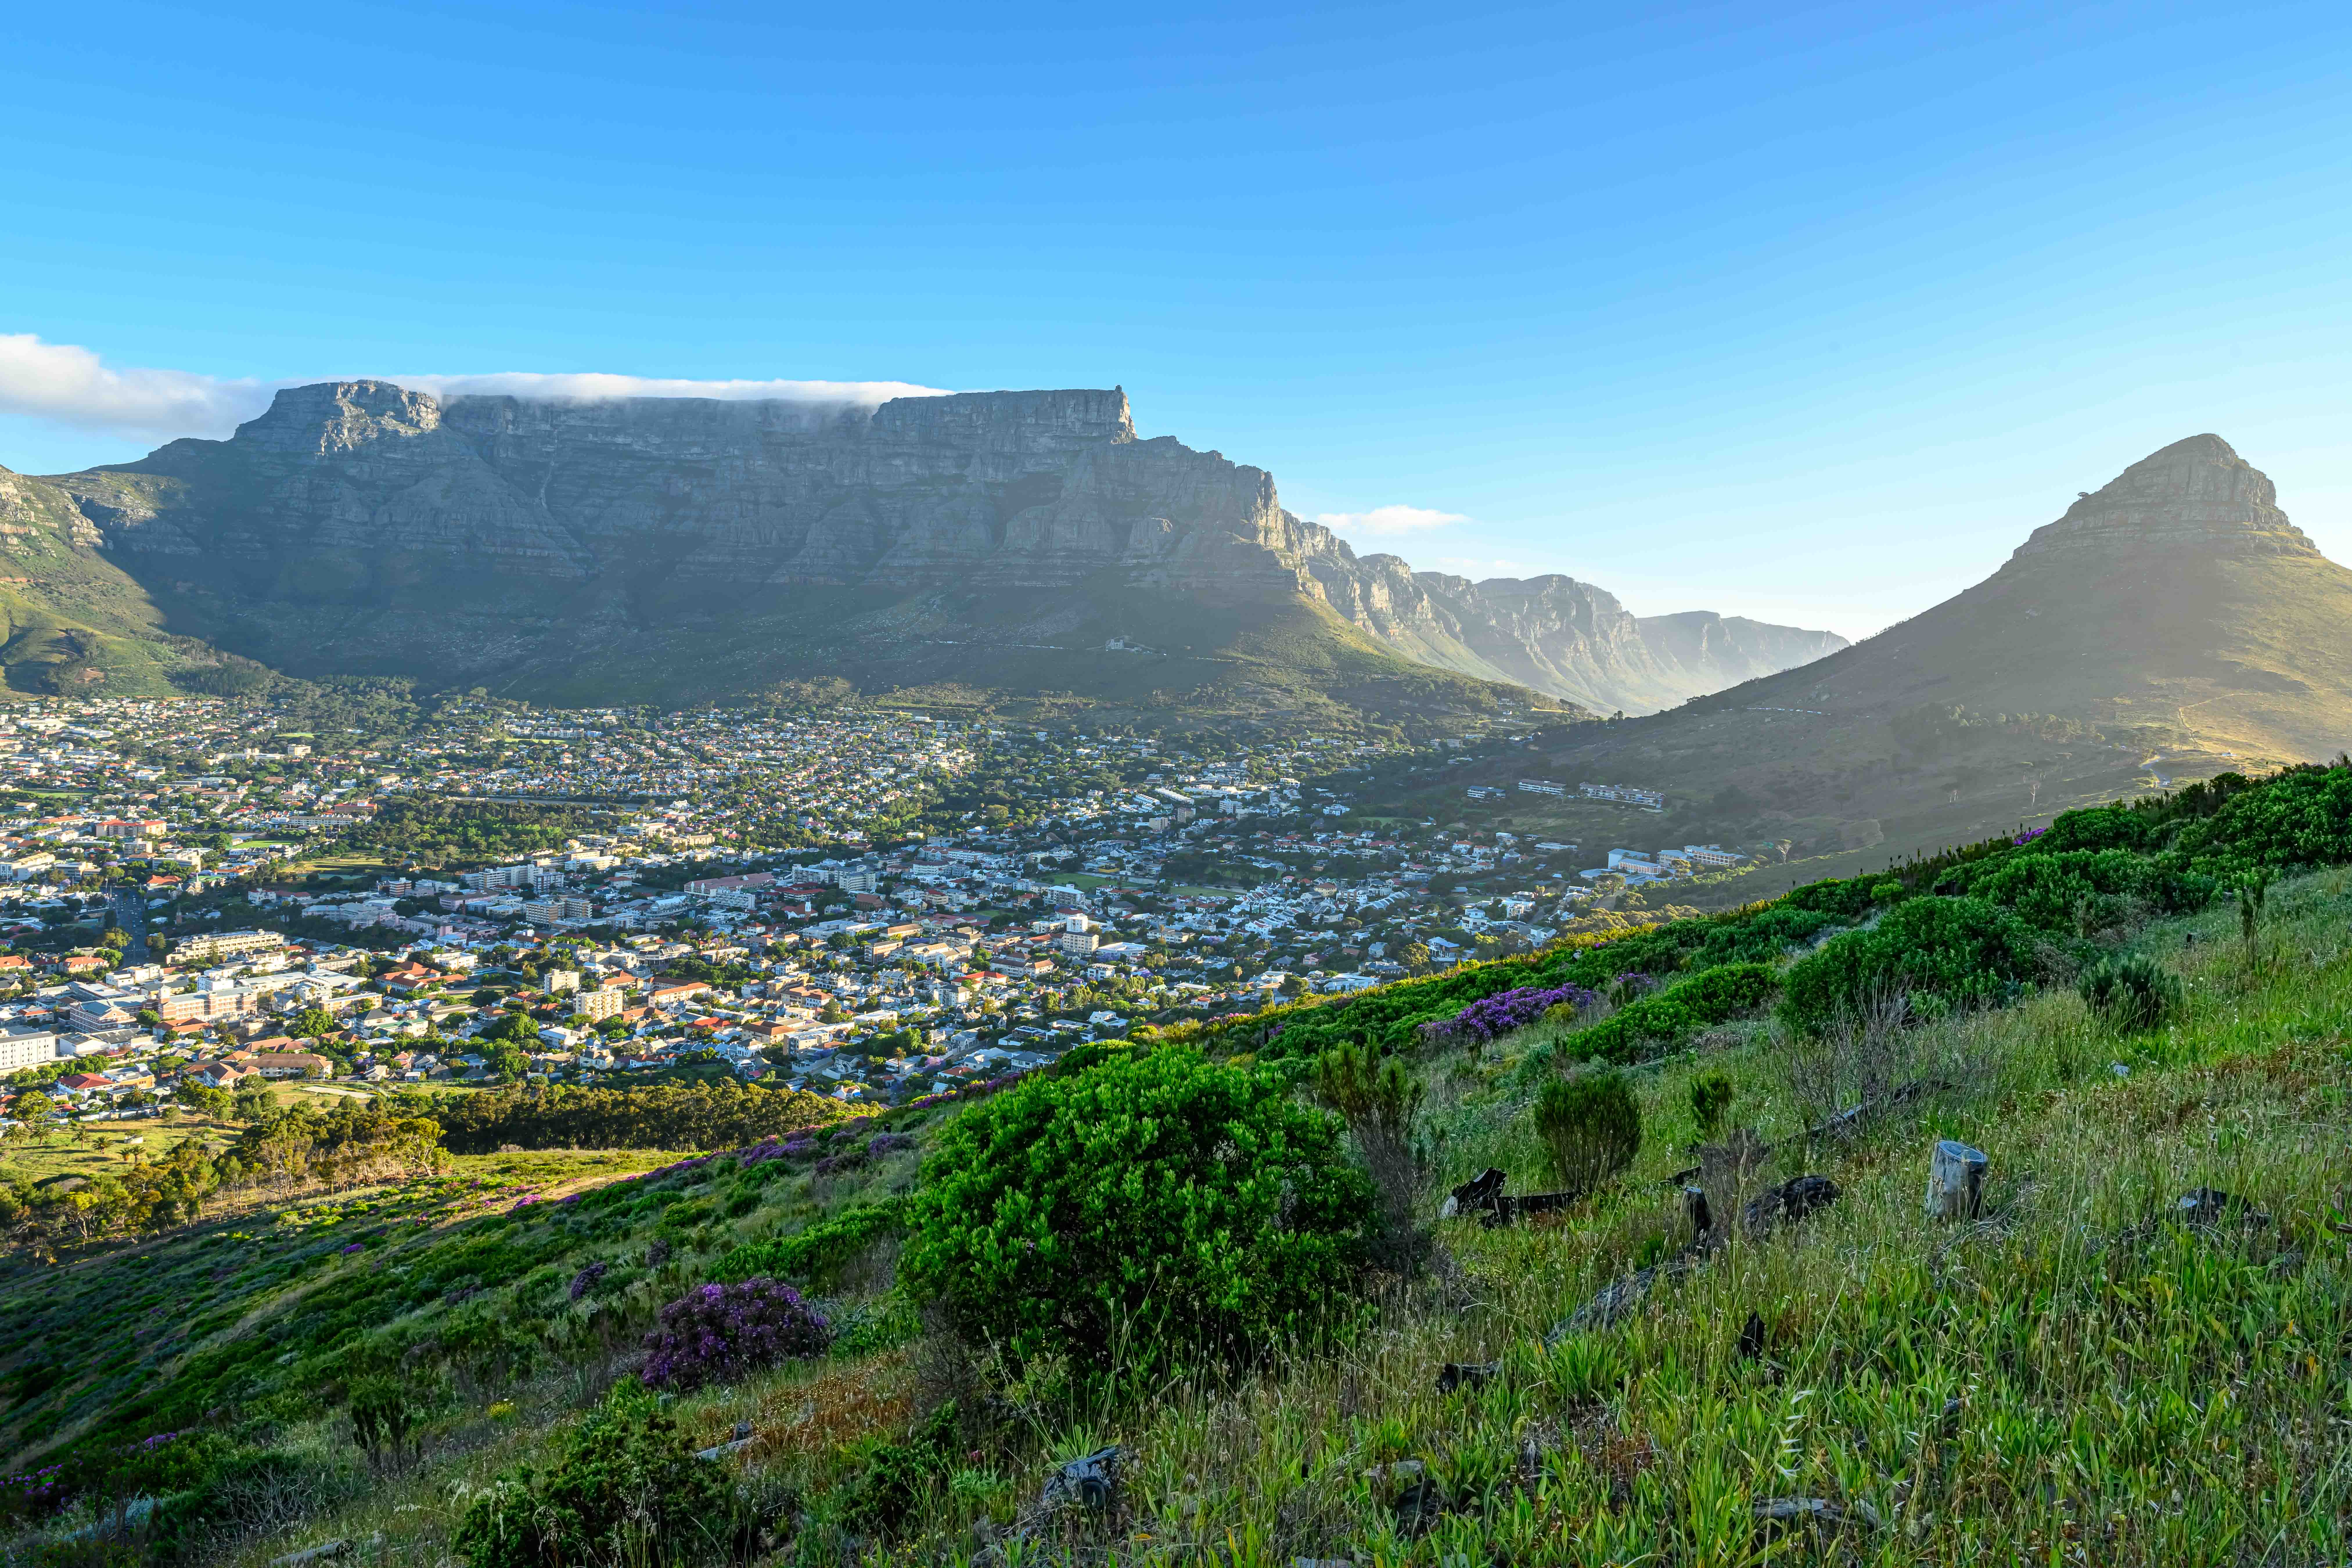 Cape Town - South Africa's Mother City